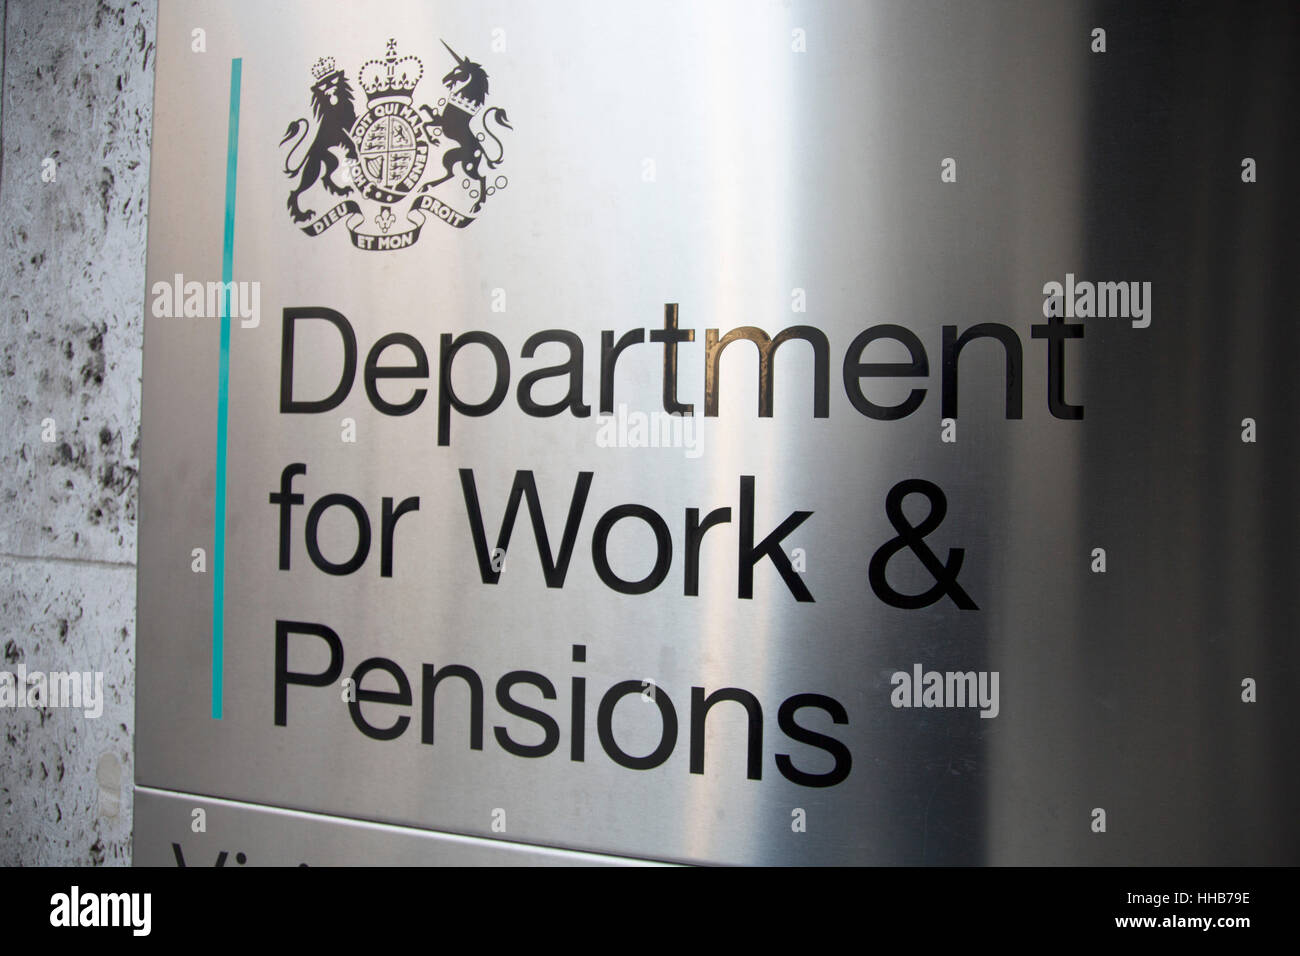 Department for Work and Pensions in London, England, United Kingdom. The Department for Work and Pensions, DWP, is responsible for welfare, pensions and child maintenance policy. As the UK’s biggest public service department it administers the State Pension and a range of working age, disability and ill health benefits to over 22 million claimants. Stock Photo